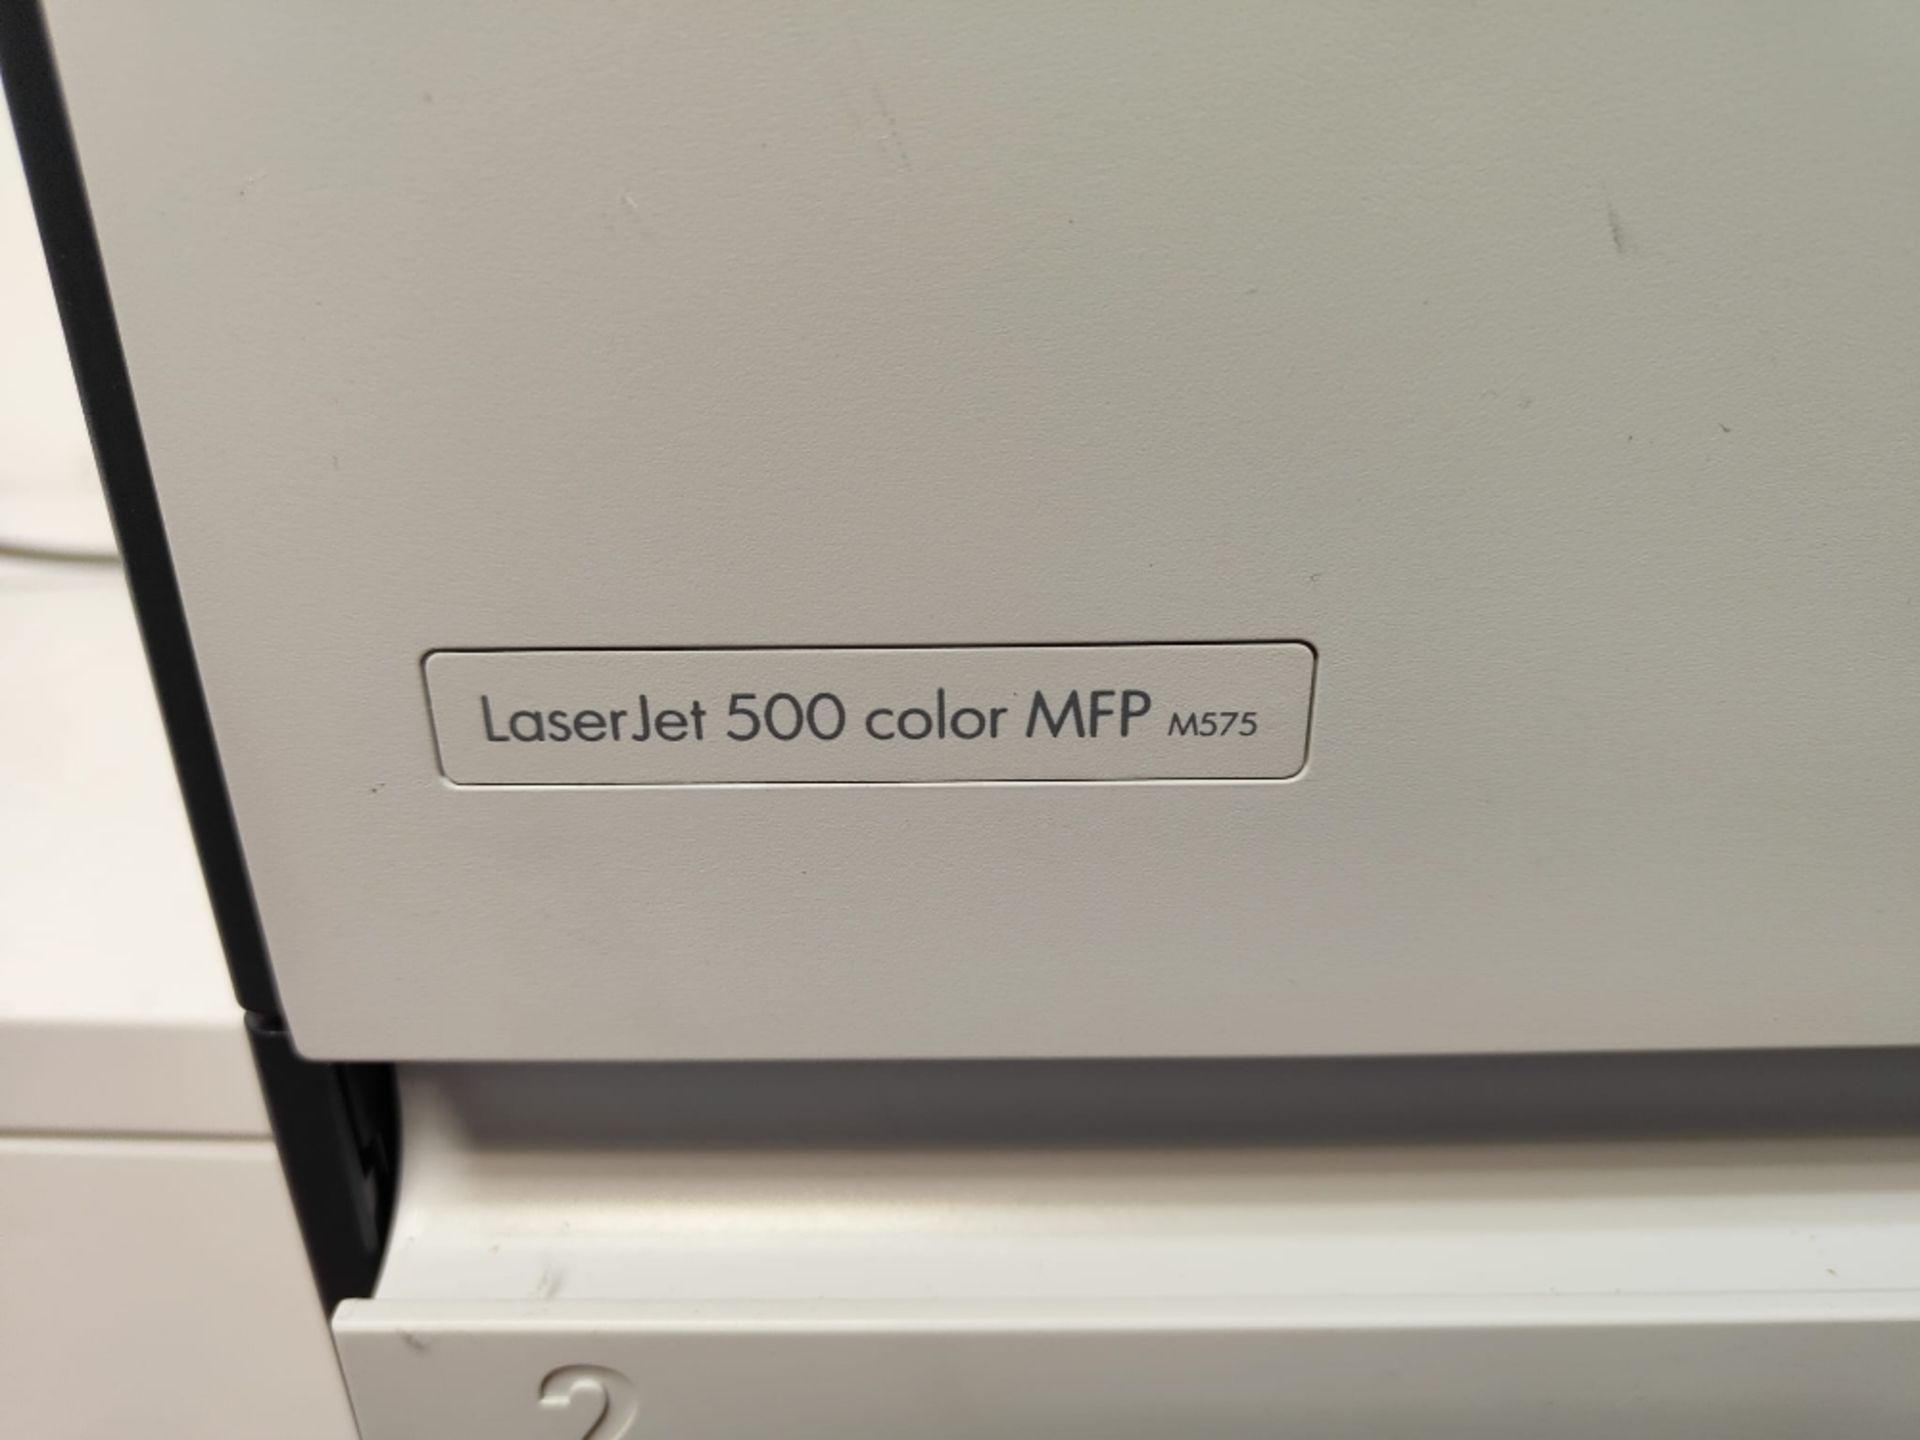 HP LaserJet 500 Color MFP M575 photocopier for spares and repairs - Image 3 of 4